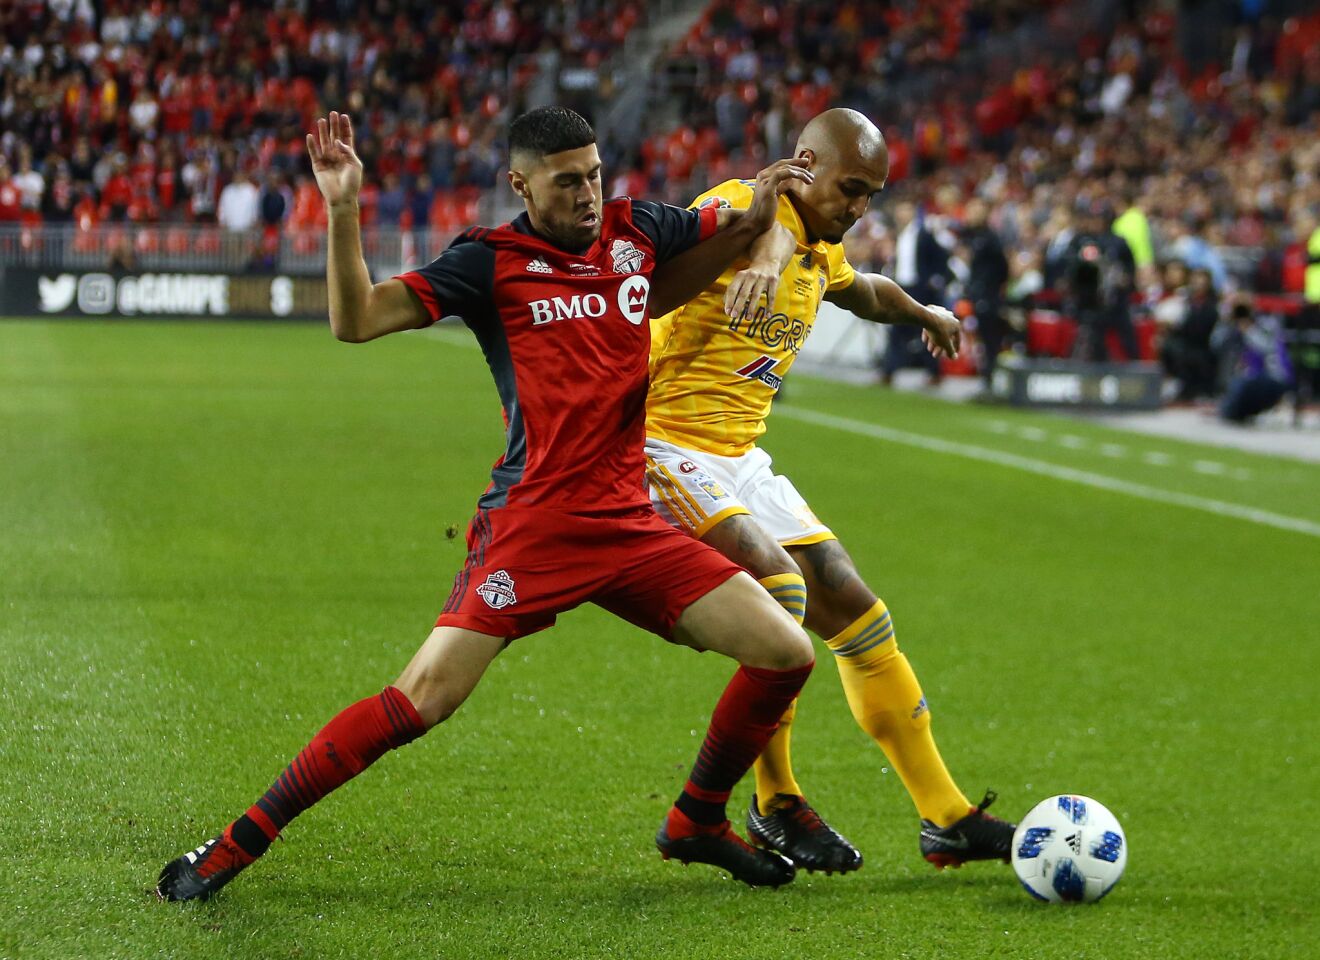 TORONTO, ON - SEPTEMBER 19: Luis Rodríguez #28 of Tigres UANL battles for the ball with Jonathan Osorio #21 of Toronto FC during the first half of the 2018 Campeones Cup Final at BMO Field on September 19, 2018 in Toronto, Canada. (Photo by Vaughn Ridley/Getty Images) ** OUTS - ELSENT, FPG, CM - OUTS * NM, PH, VA if sourced by CT, LA or MoD **